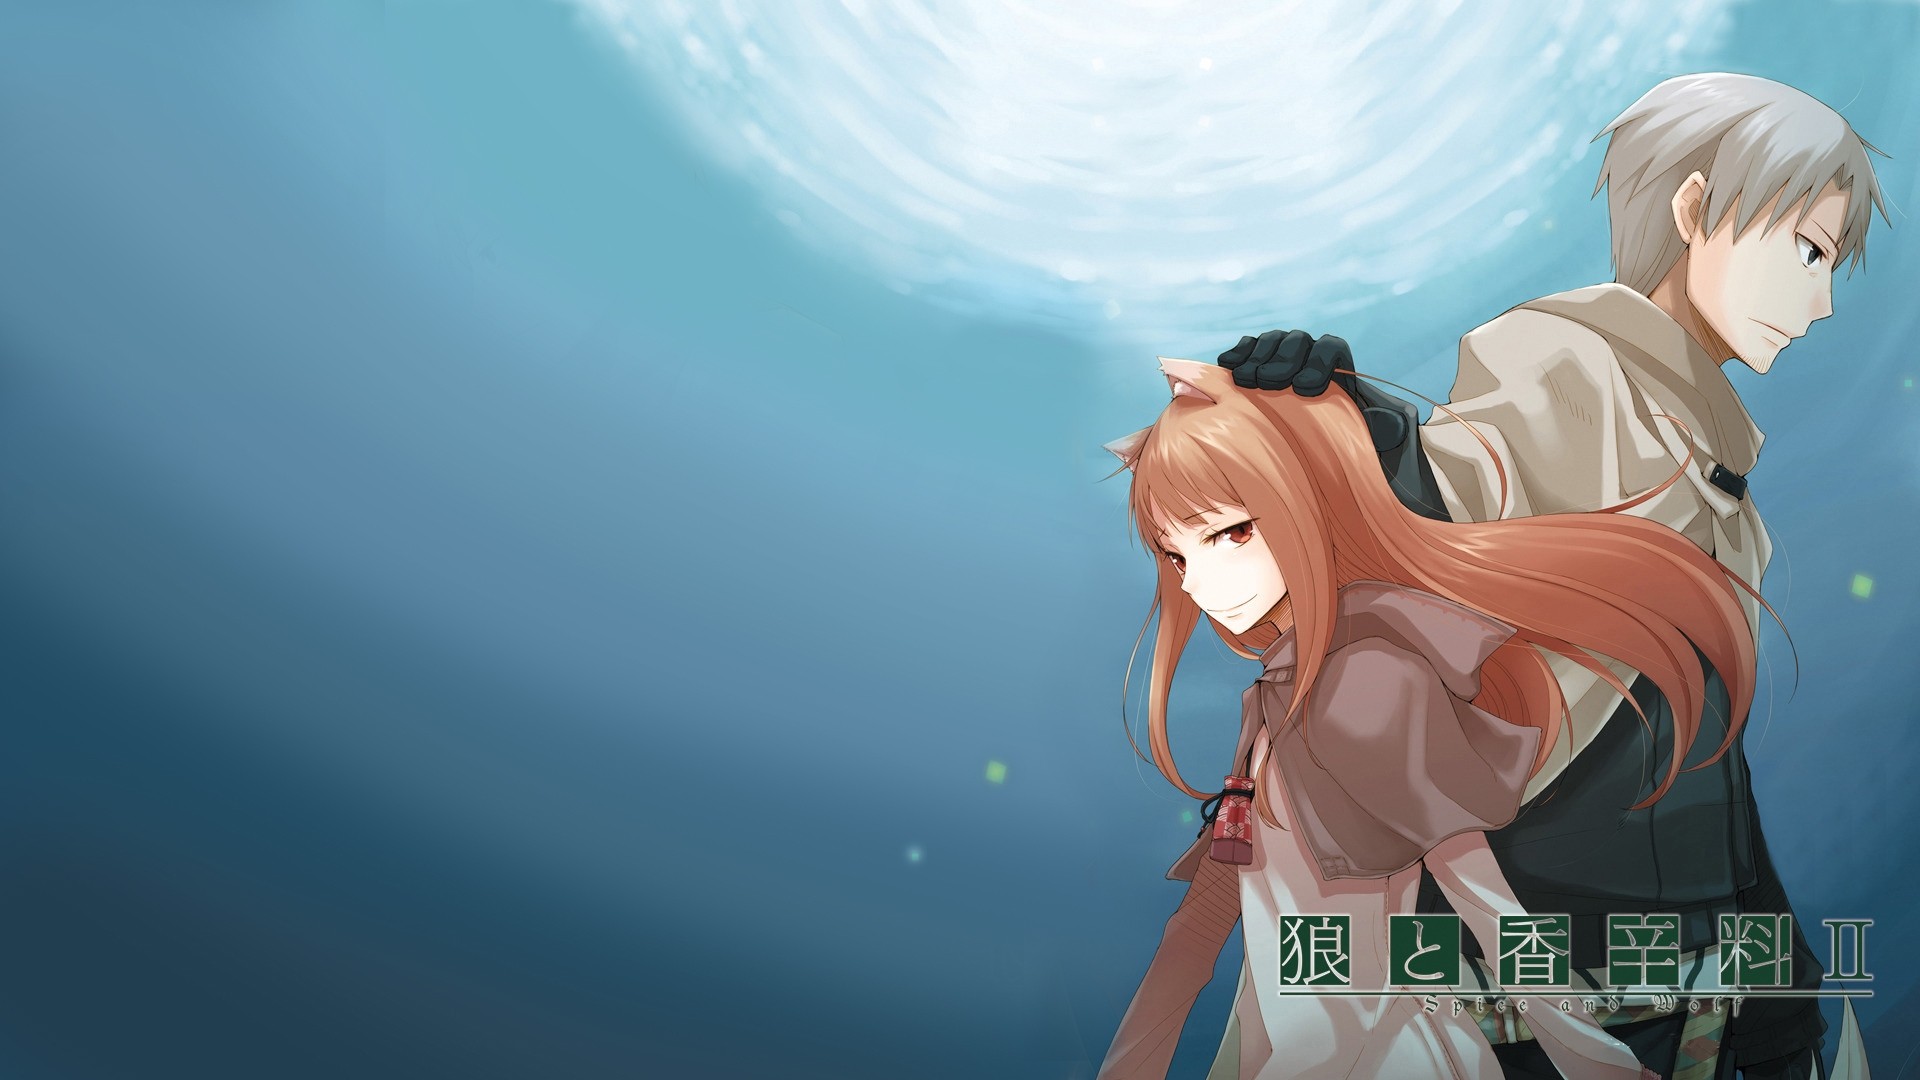 Anime Spice And Wolf Holo Spice And Wolf Lawrence Craft Anime Girls Okamimimi 1920x1080